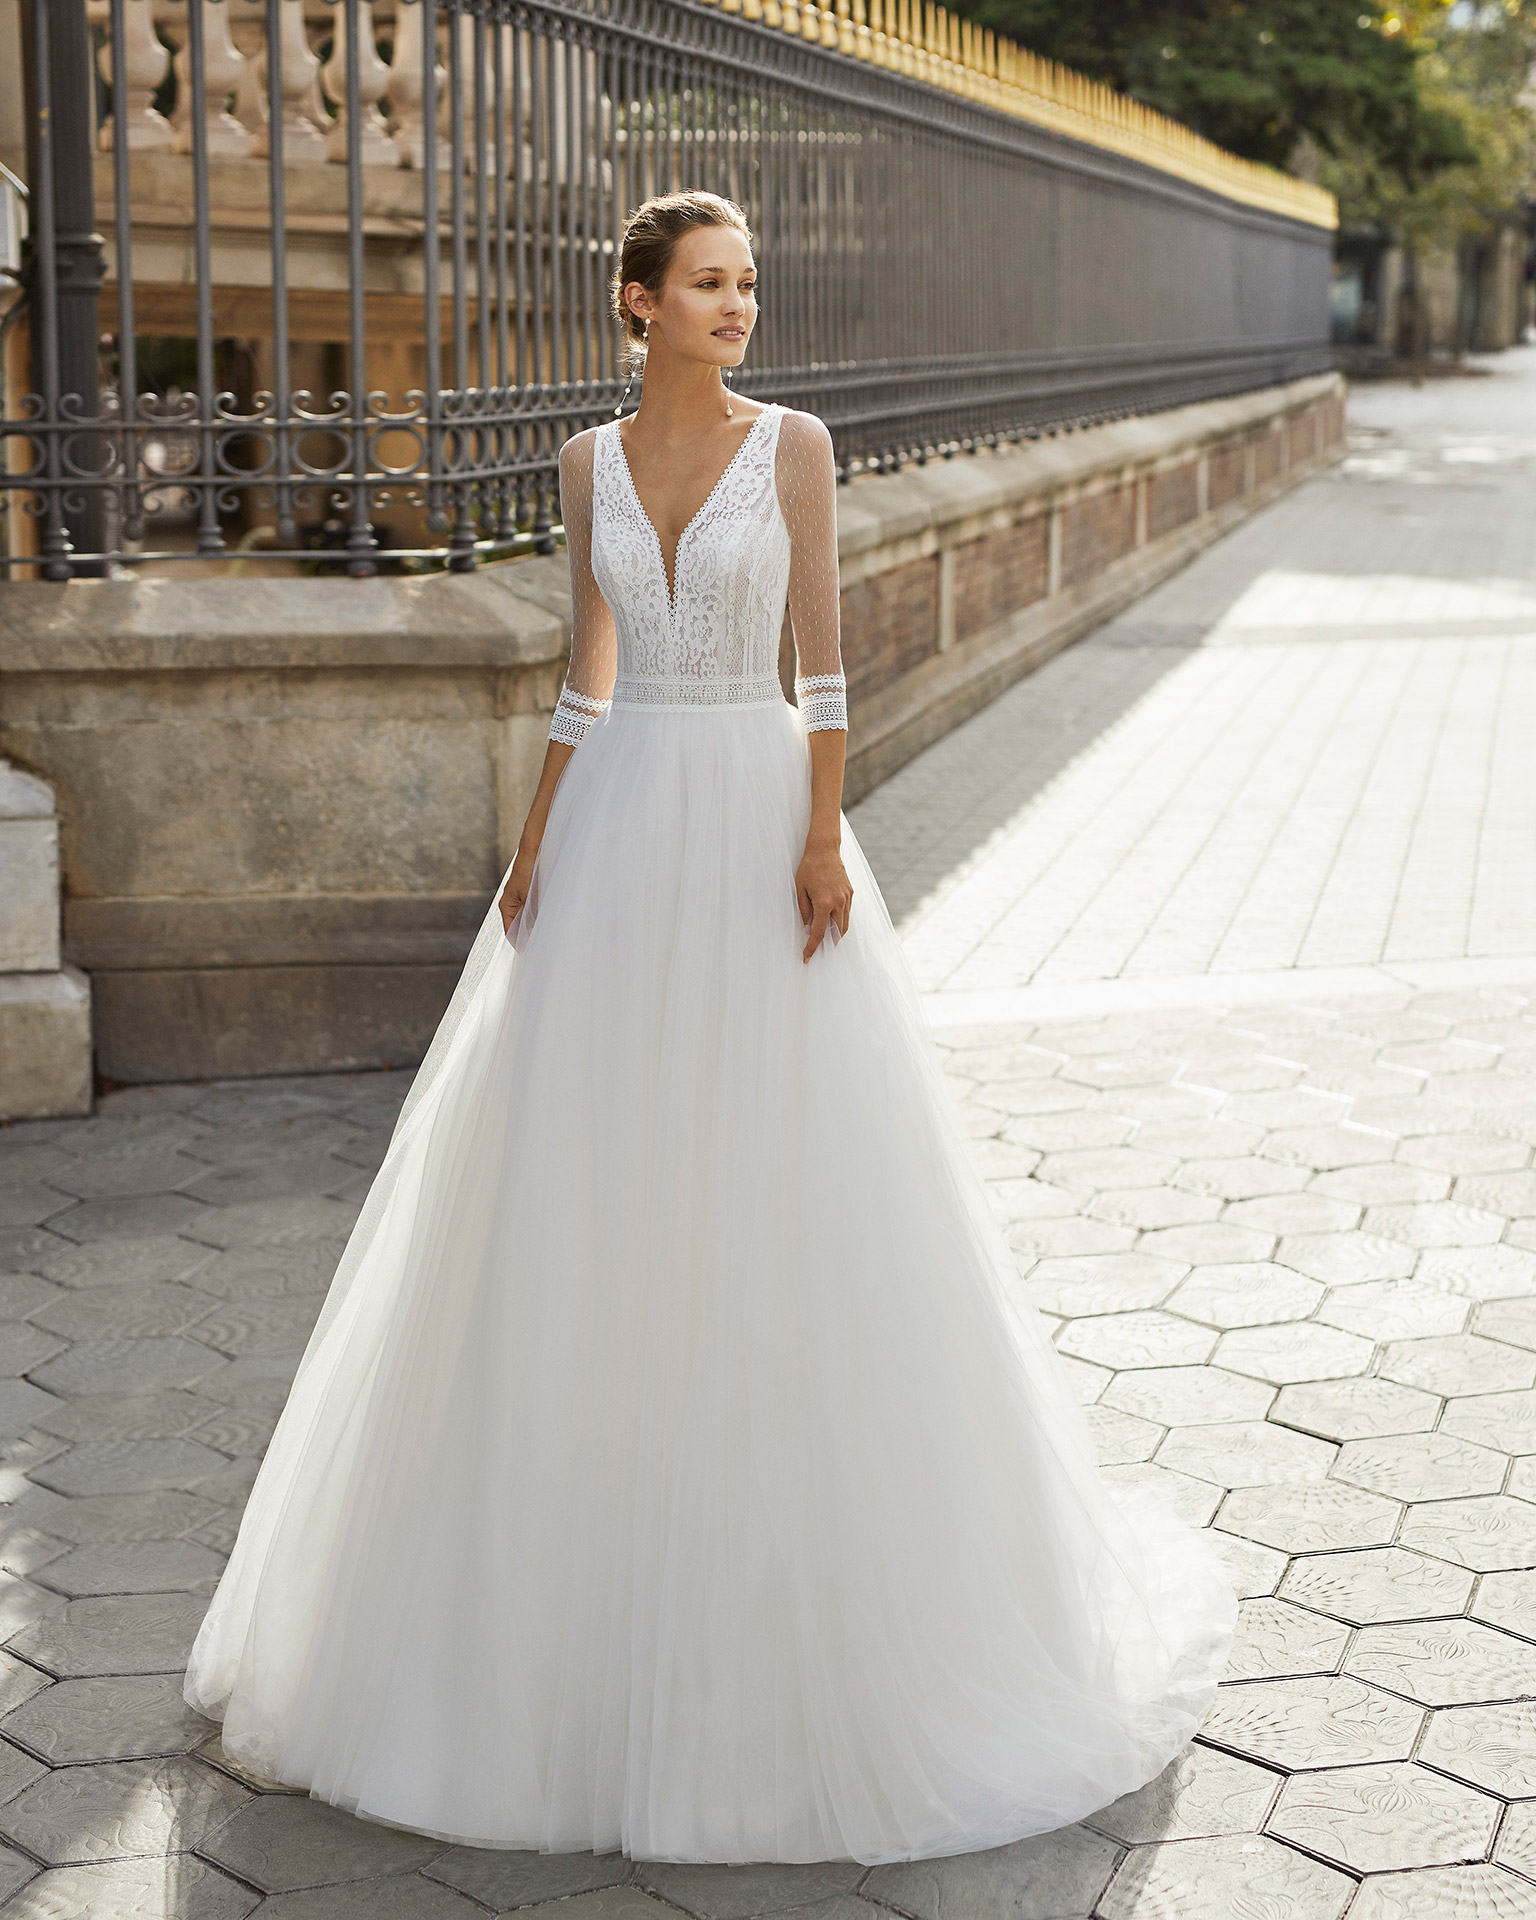 Romantic wedding dress, tulle and dot tulle underskirt, lace and beaded waist. Deep-plunge neckline, V-back and 3/4-length dot tulle sleeves. 2022  Collection.